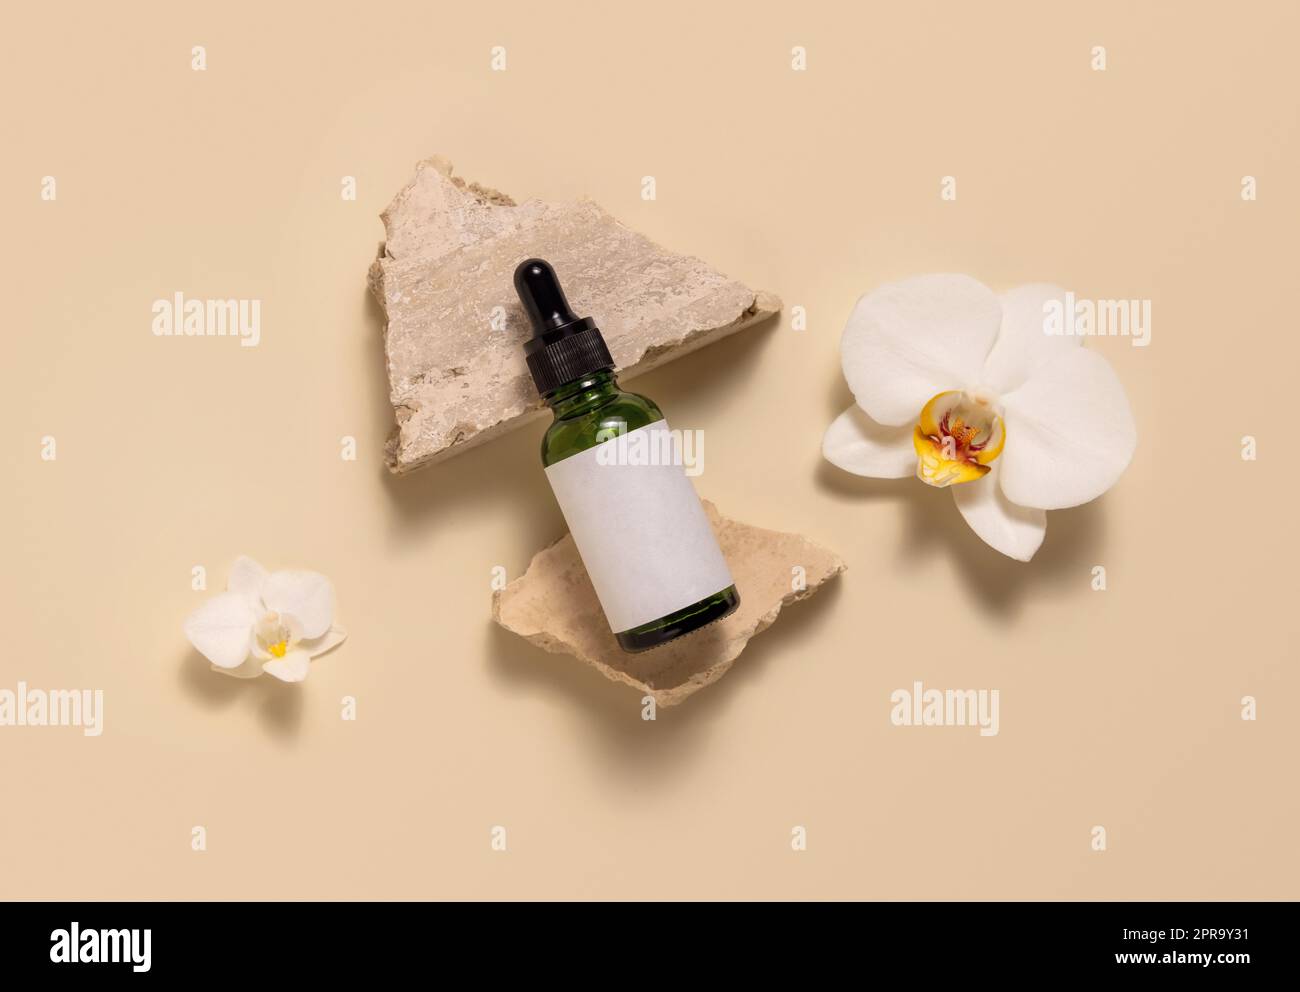 Green glass dropper bottle on stones near white orchid flowers on light yellow, Mockup Stock Photo